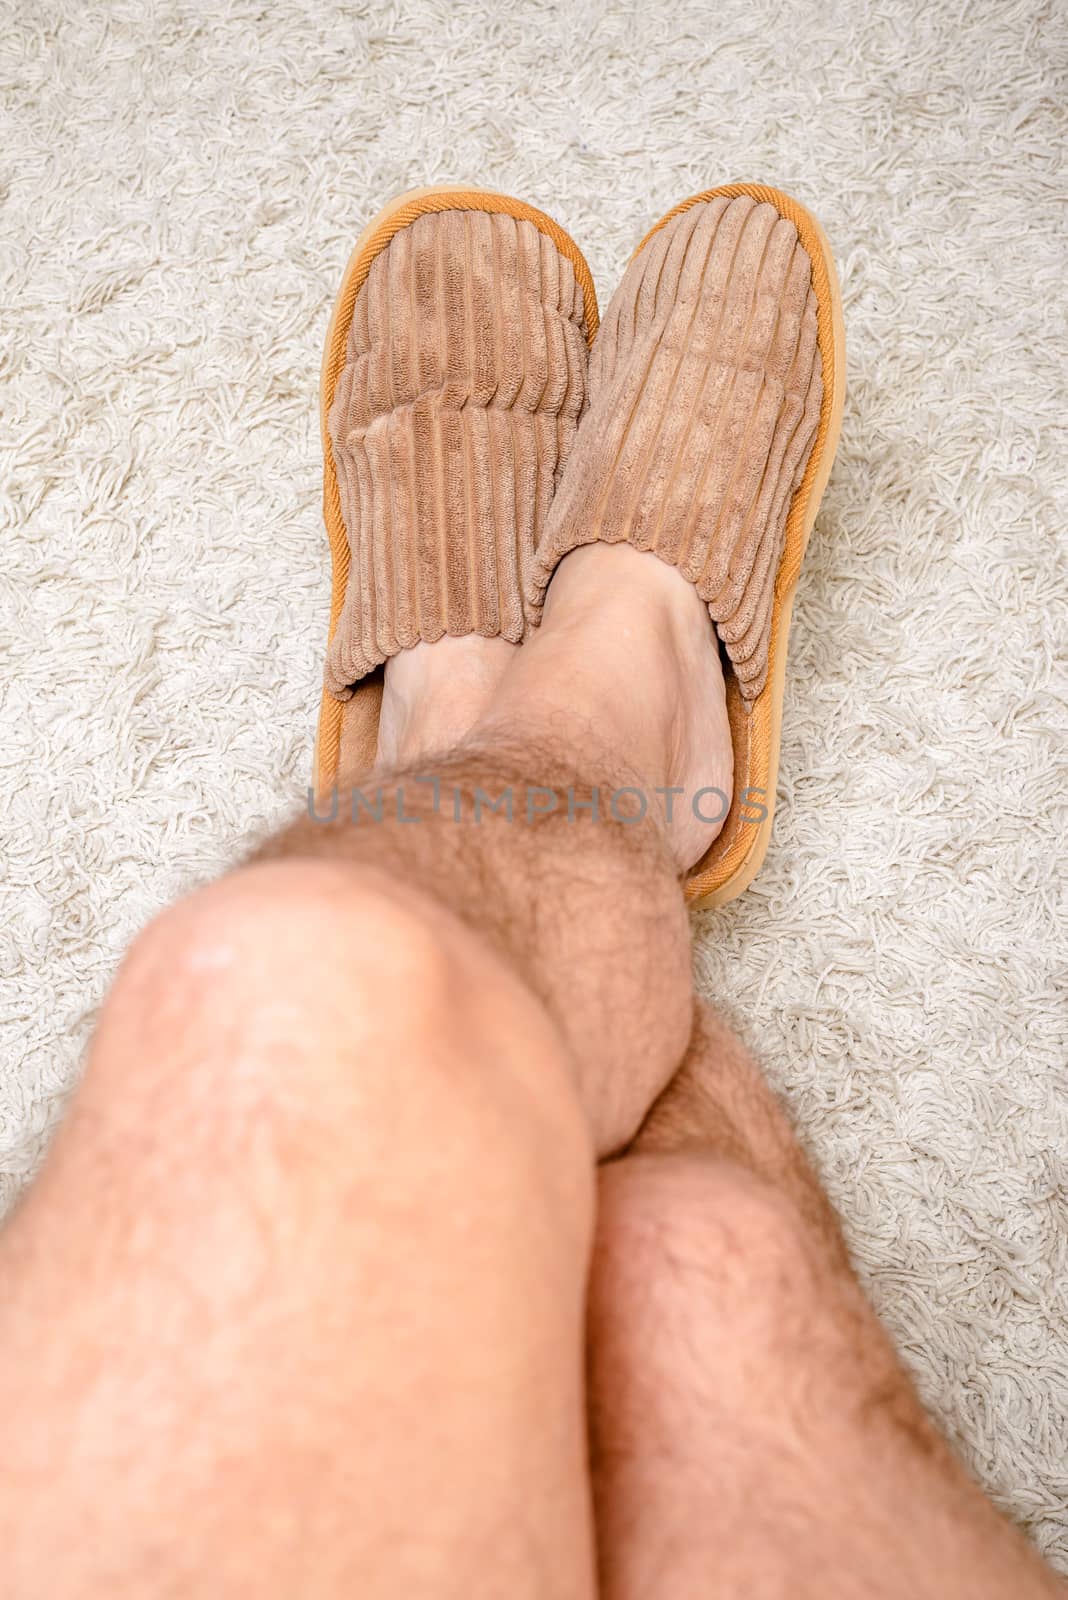 A man with hairy legs is wearing warm slippers and relaxing with the feet on a wool carpet